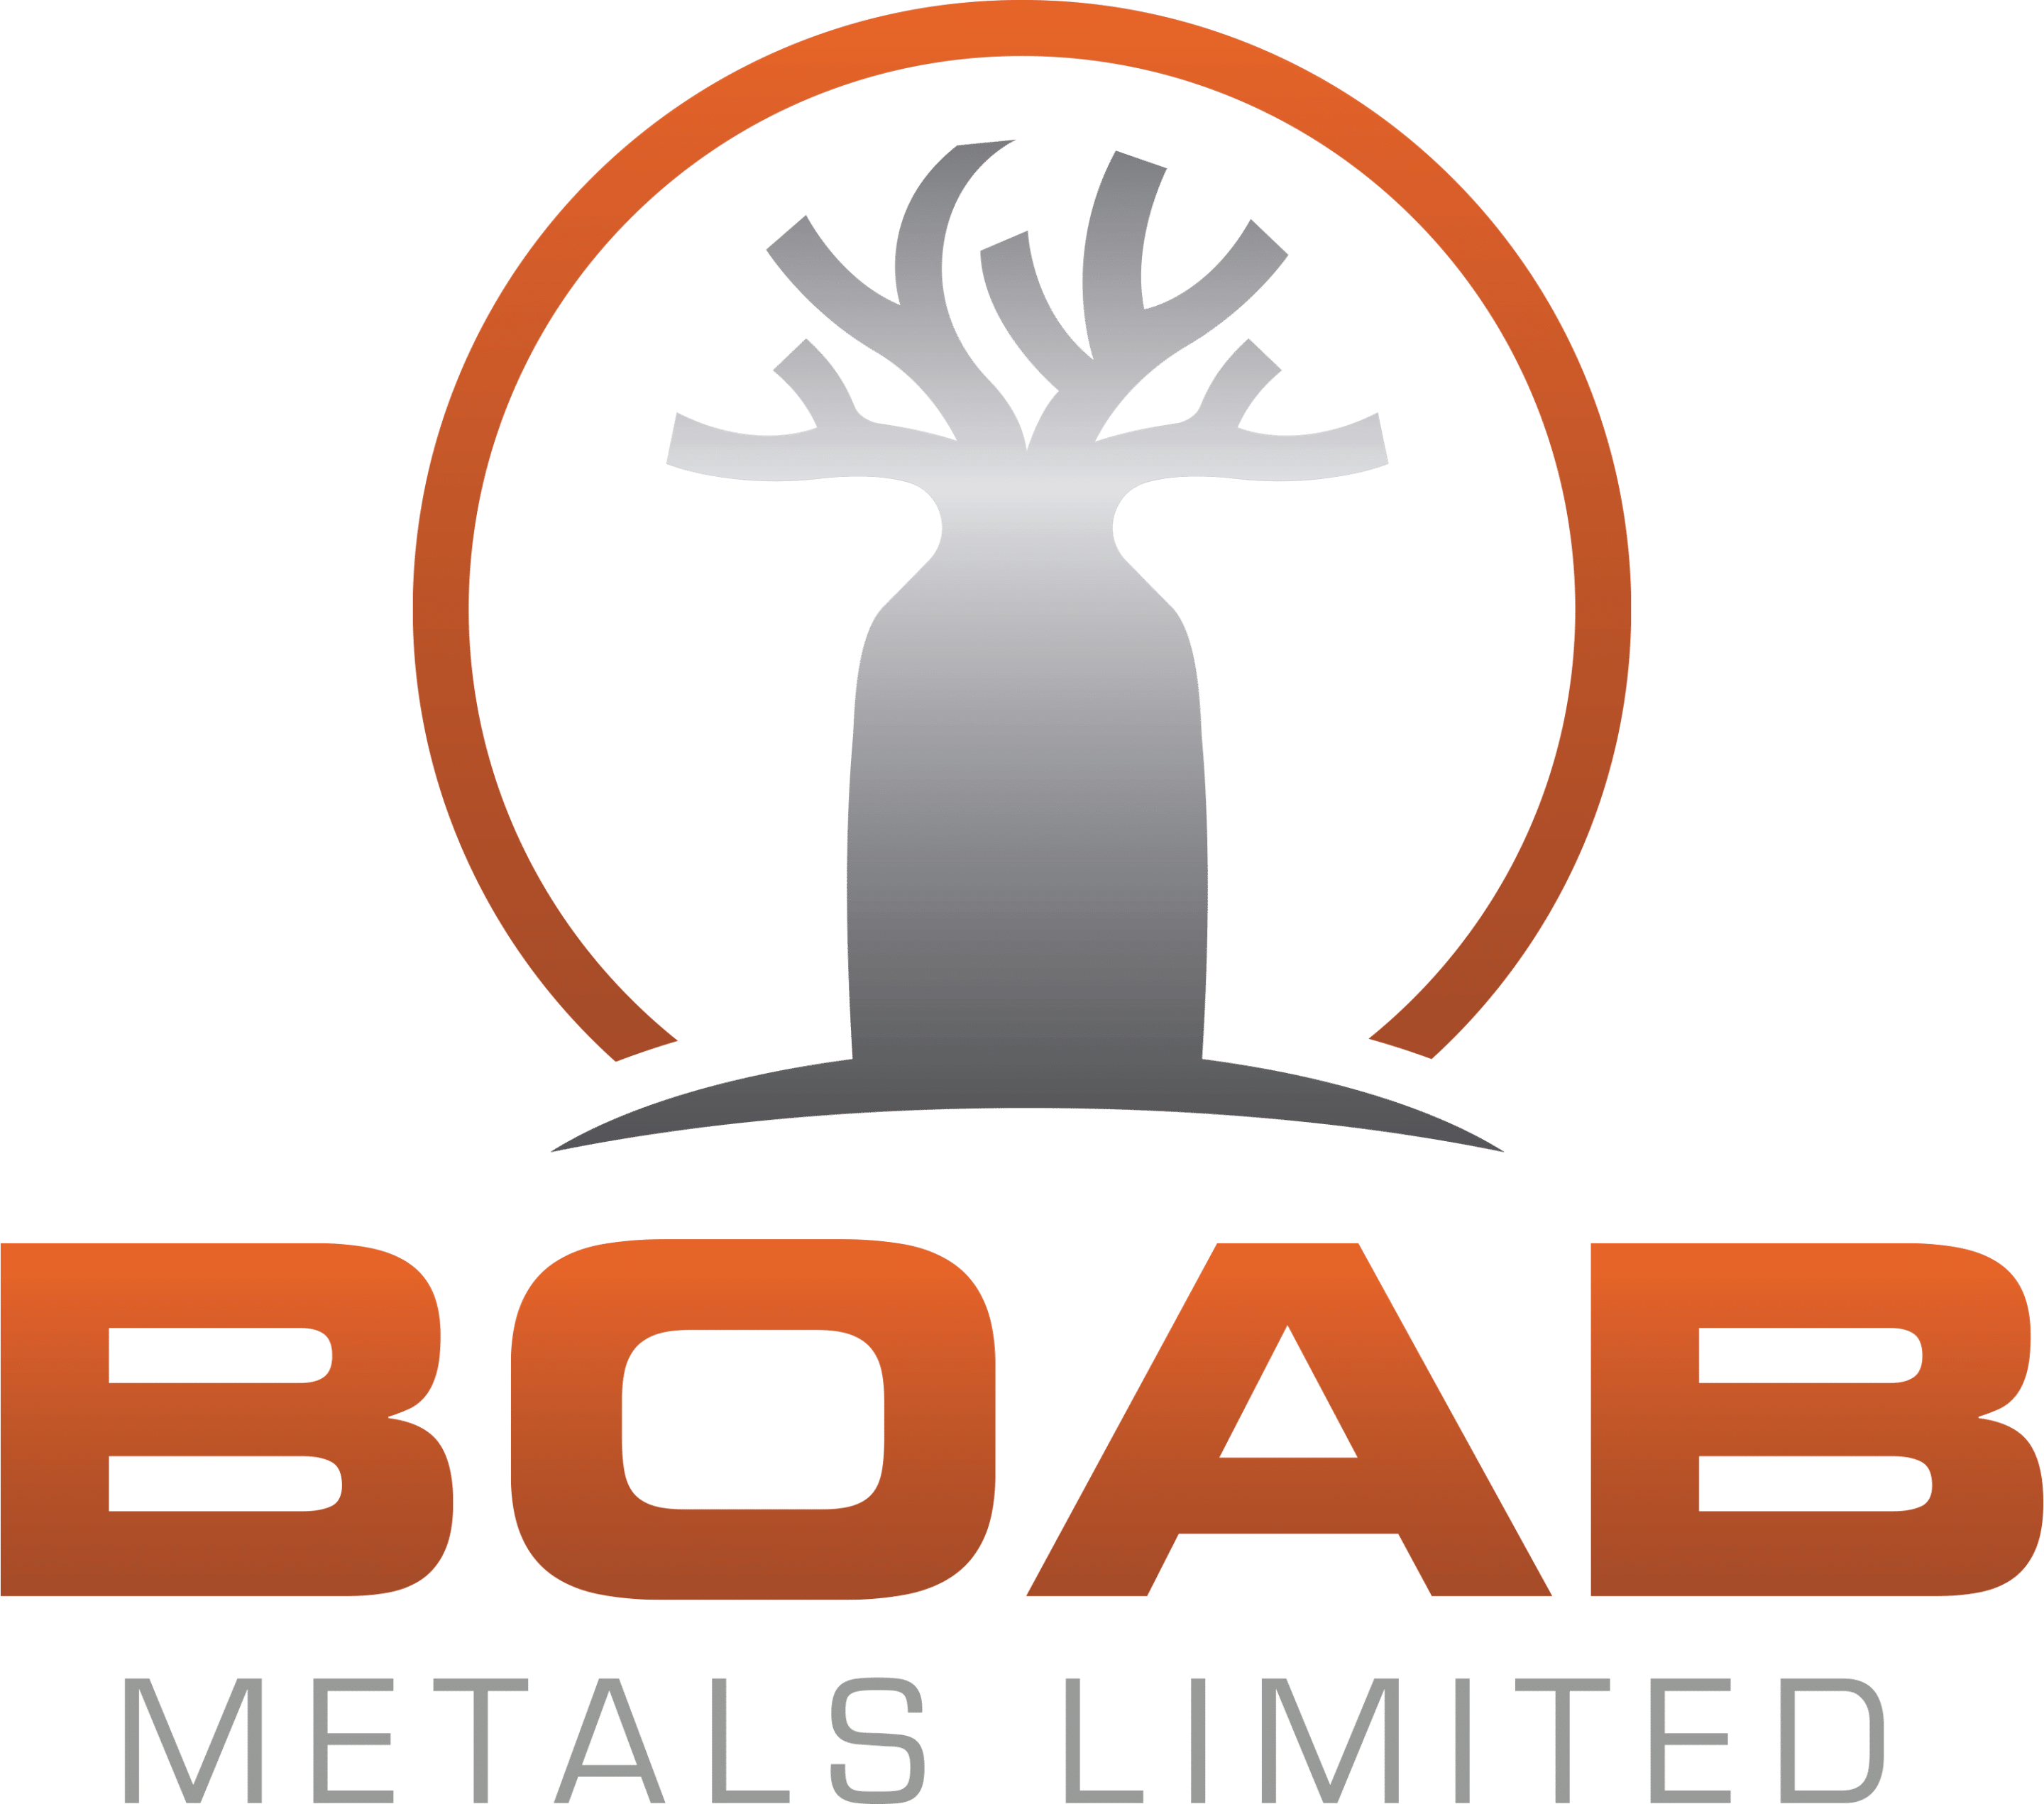 Boab Metals Limited